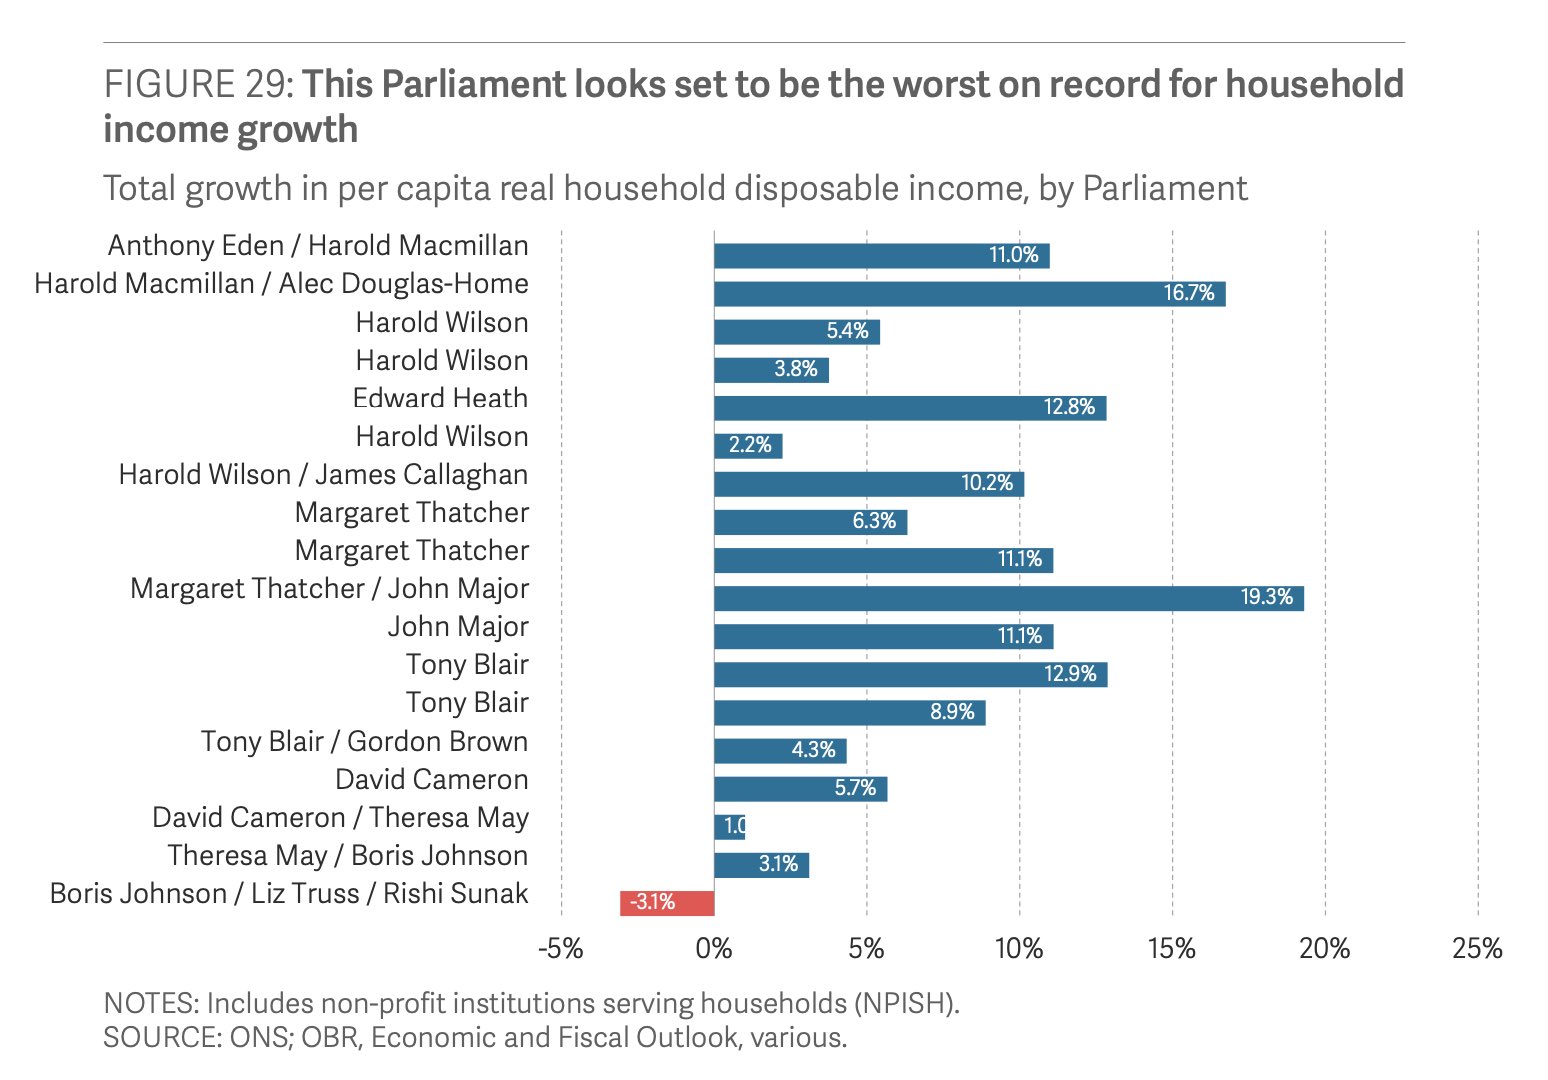 This parliament worst on record for household income growth (Picture credit: Resolution Foundation)